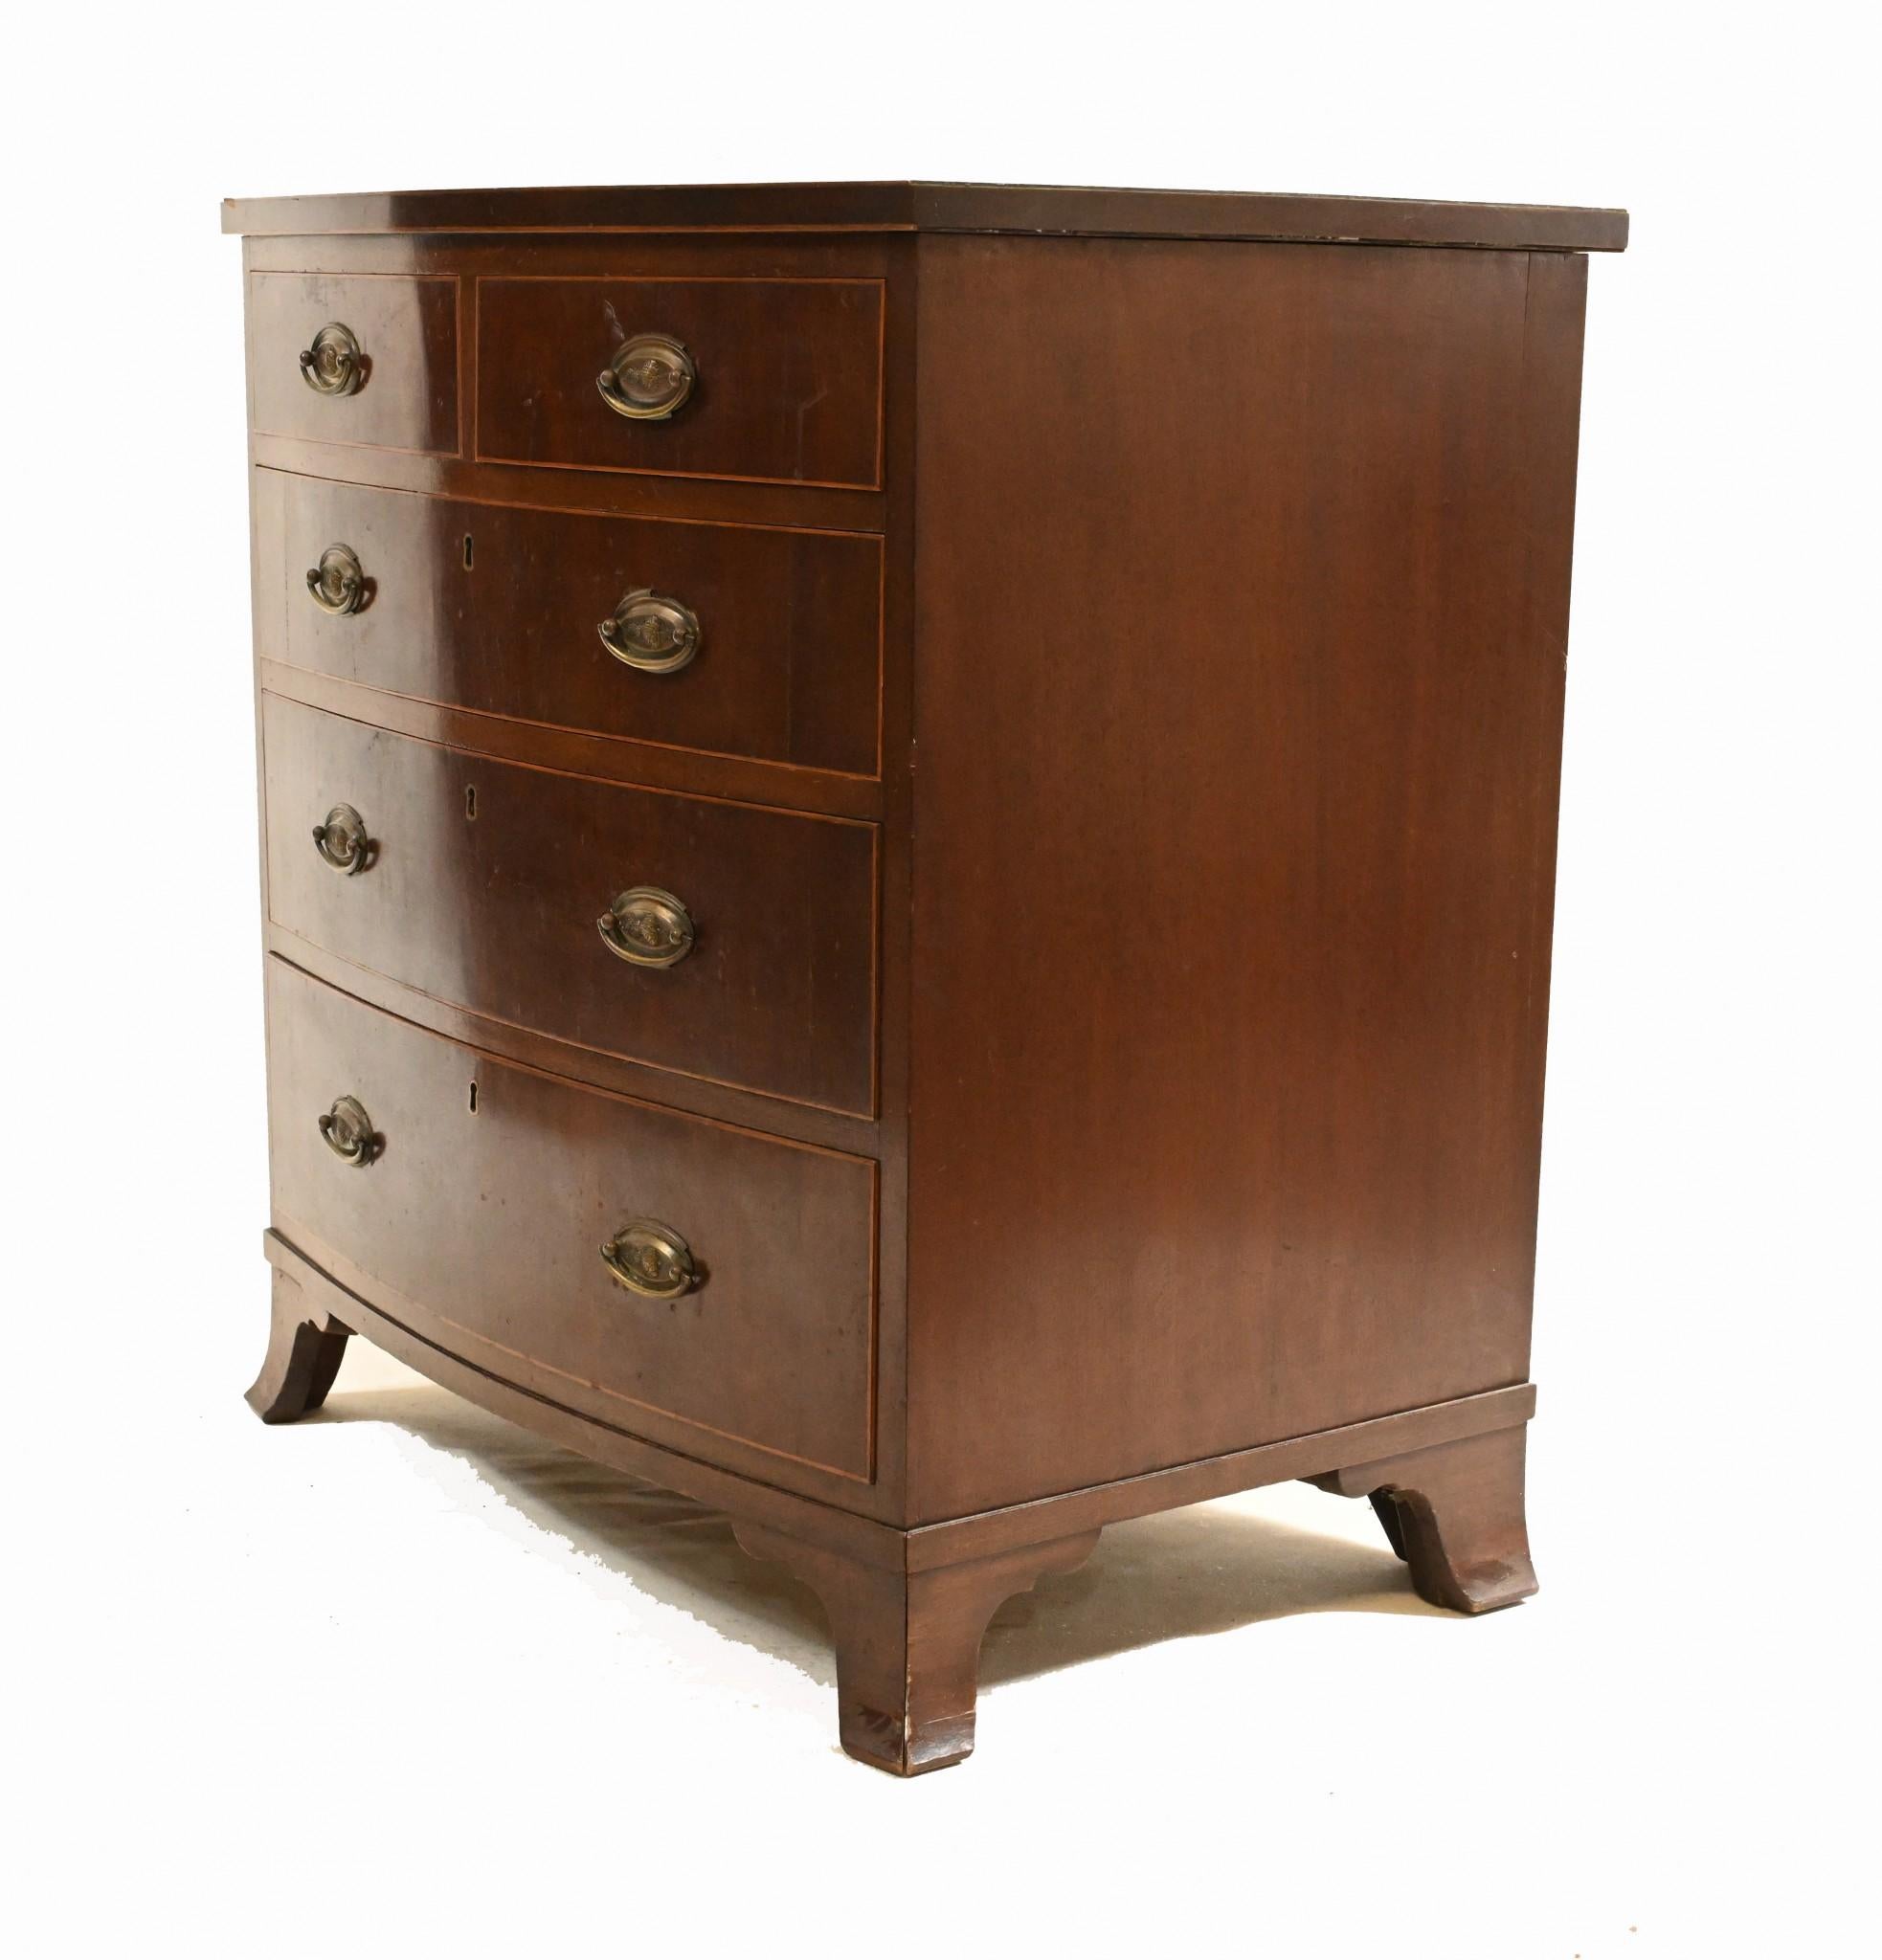 Gorgeous Regency chest of drawers in mahogany
Circa 1810 and with bow front form
Features five drawers
Offered in great shape ready for home use right away
We ship to every corner of the planet